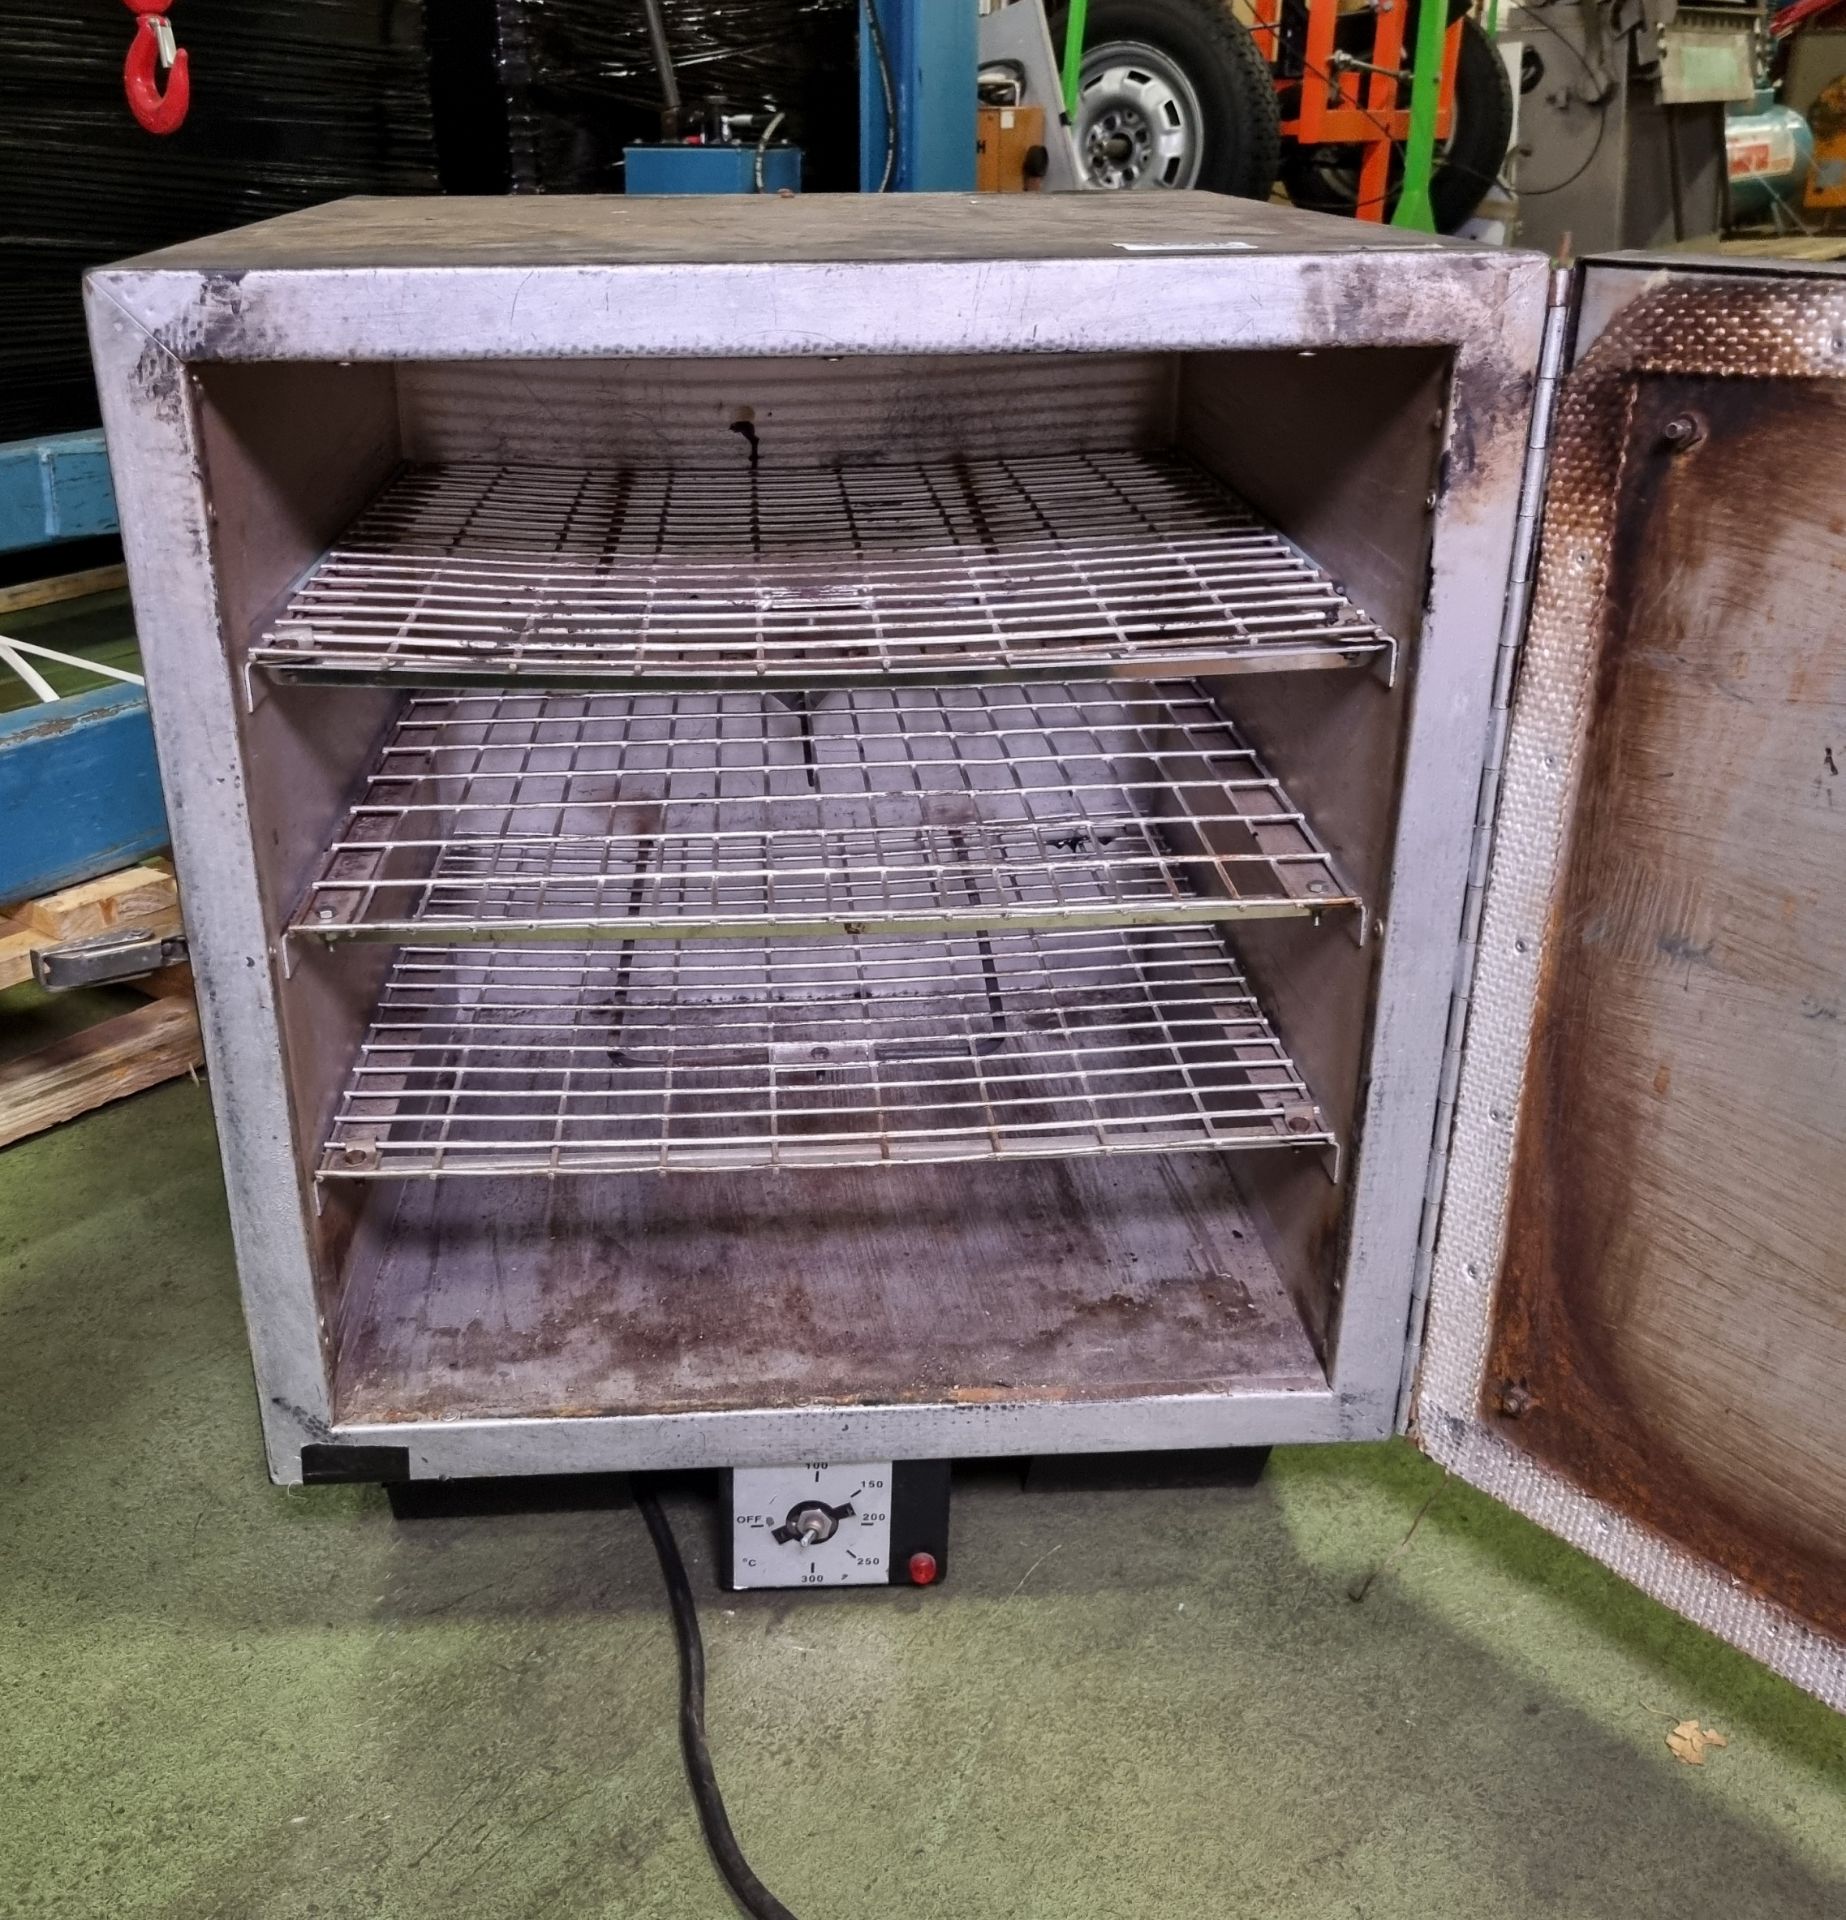 Murex 655258 thermal drying oven - 240V - Image 3 of 4